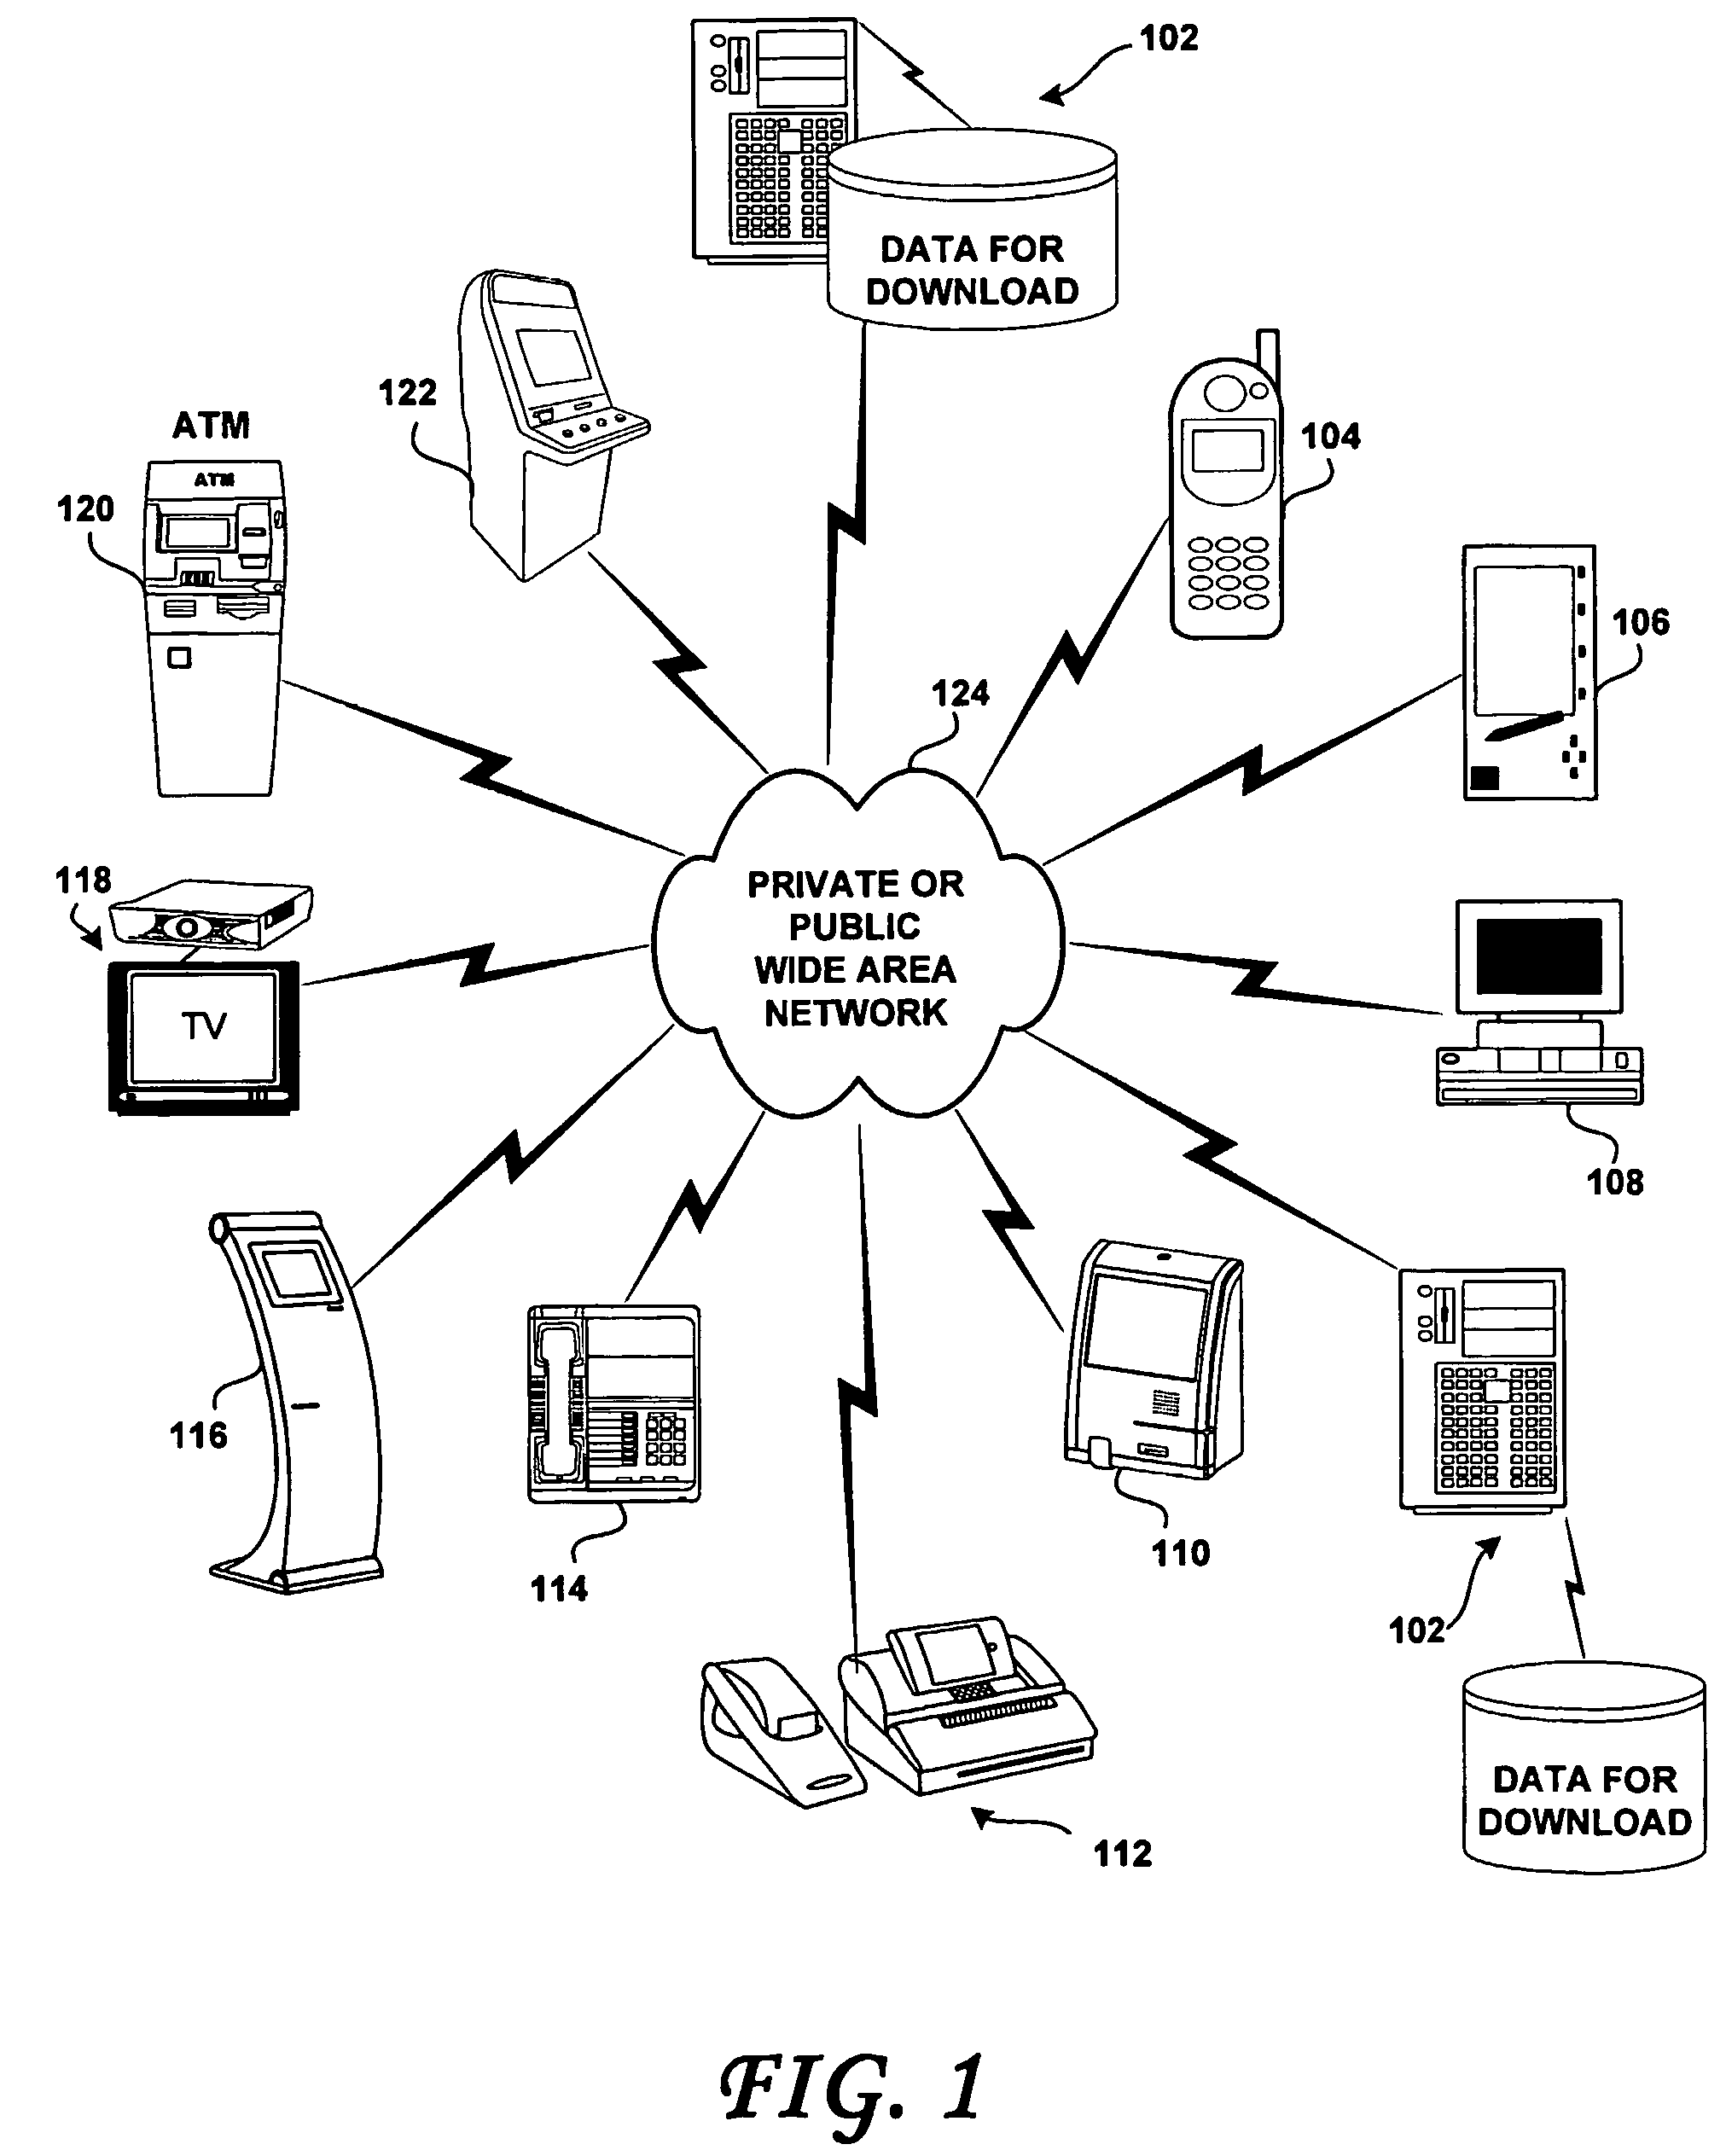 Methods and systems for large scale controlled and secure data downloading